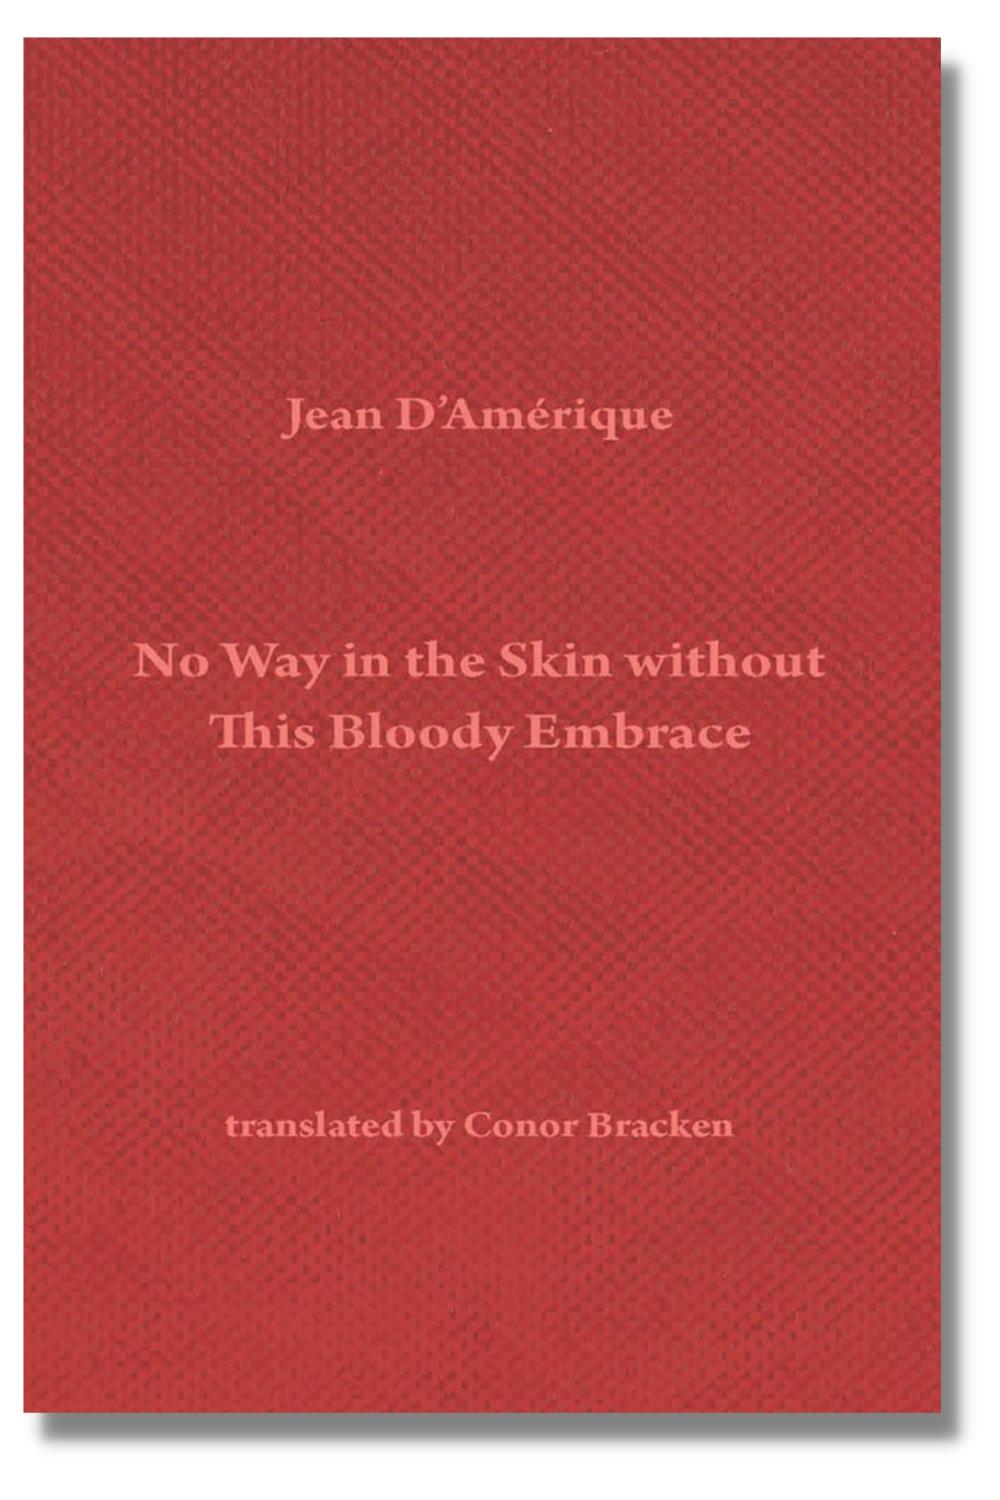 The cover of "No Way in the Skin without This Bloody Embrace"